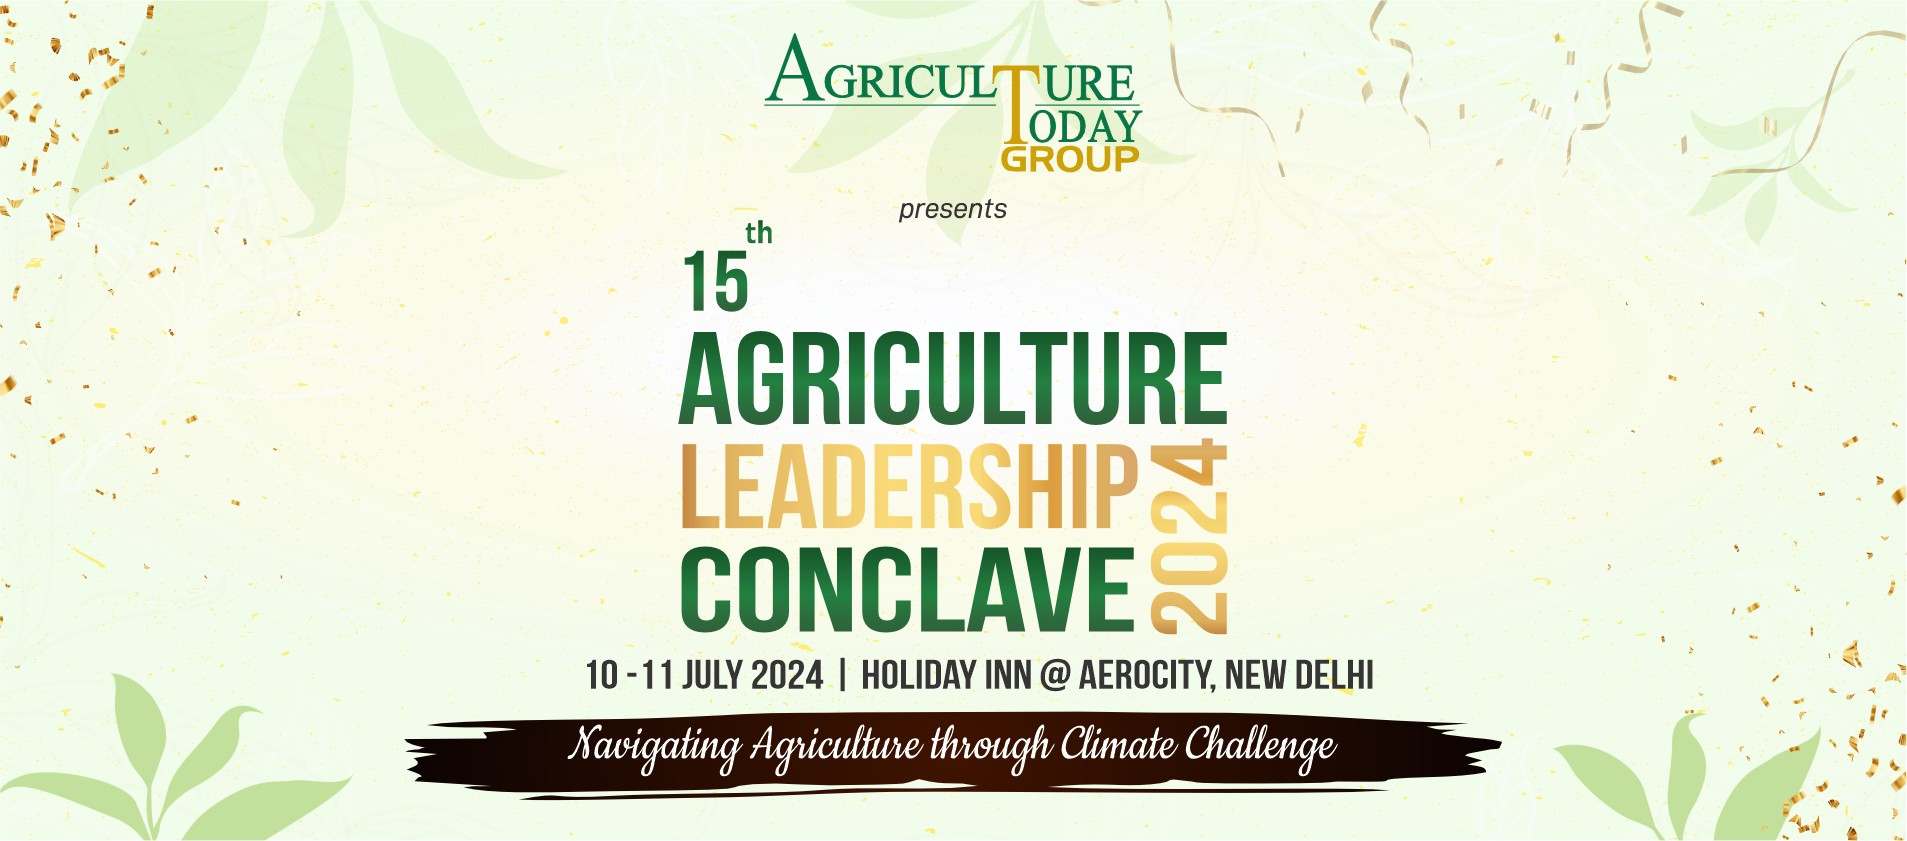 14th Agriculture Leadership Conclave 2023